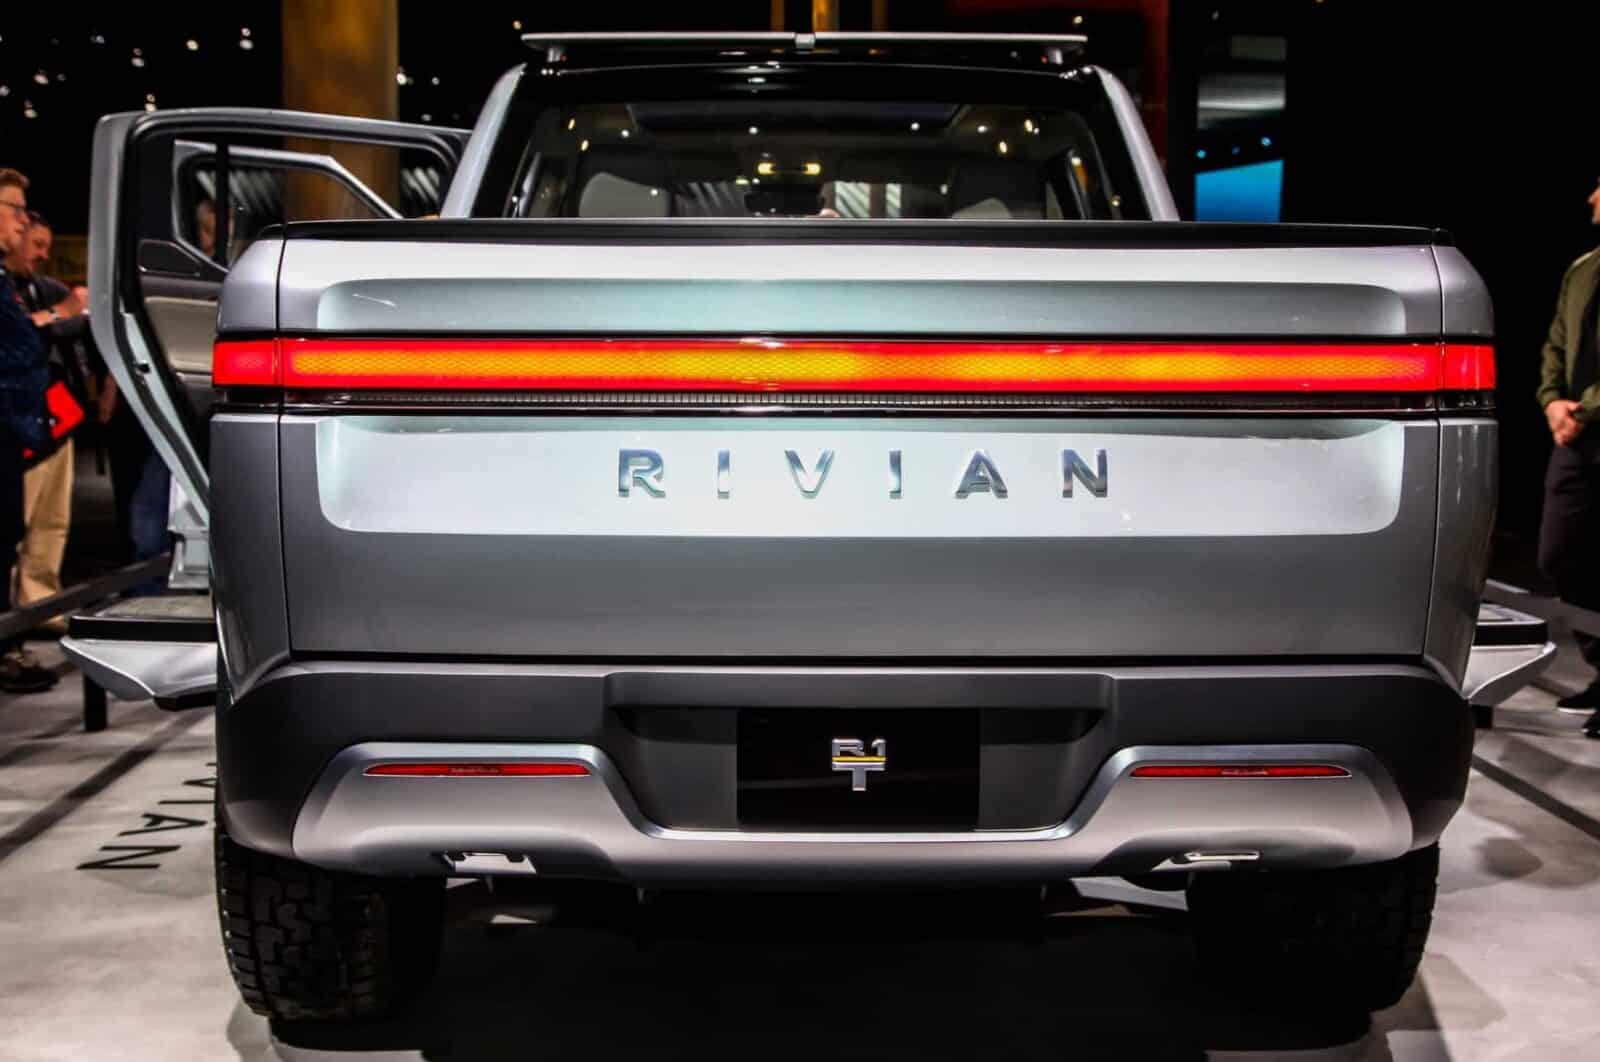 Rivian Expensive Journey To Carve A Niche In Electric Vehicles 2